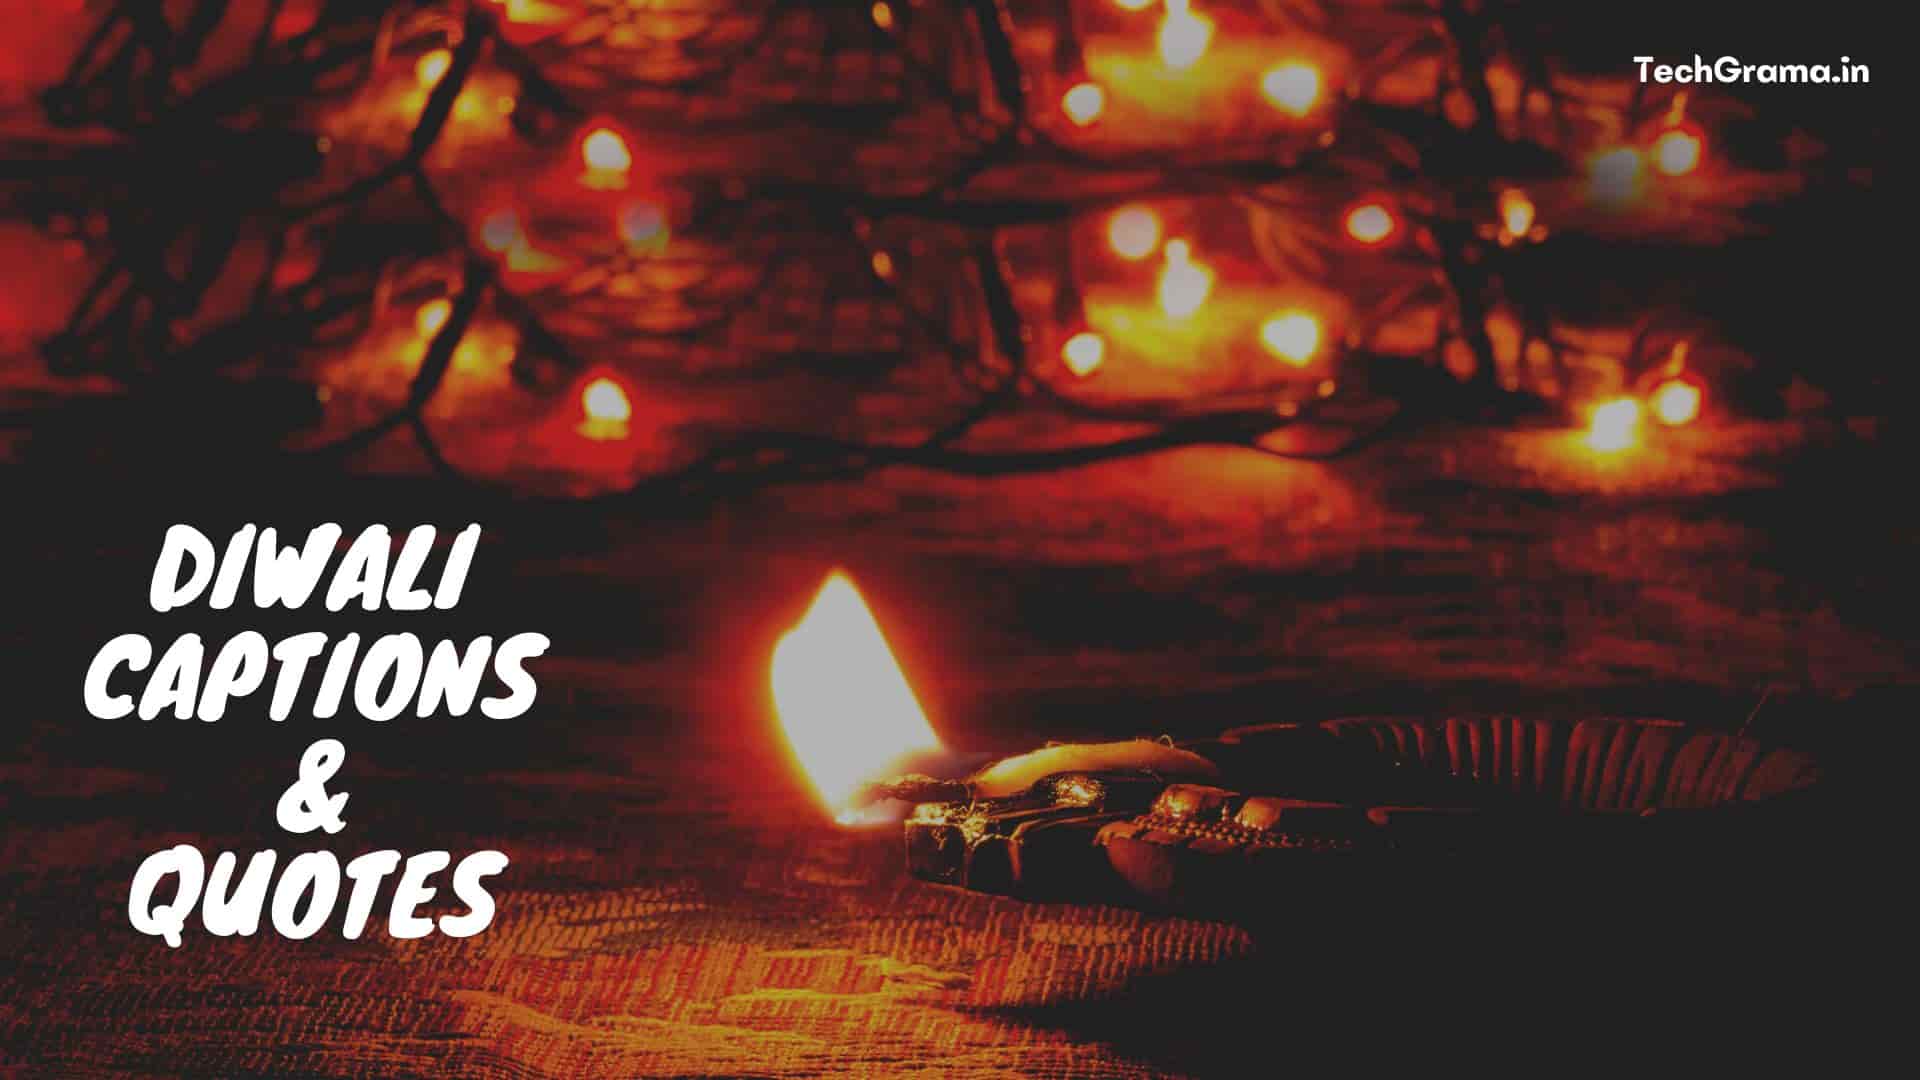 Best Diwali Captions & Quotes, Diwali Captions For Instagram, Diwali Quotes For Instagram, Caption For Diwali Pics, Diwali Wishes Caption, Caption For Diwali Post, Diwali Happiness Quotes, Happy Diwali Captions, Insta Caption For Diwali, Diwali Captions For Girls and Boys.